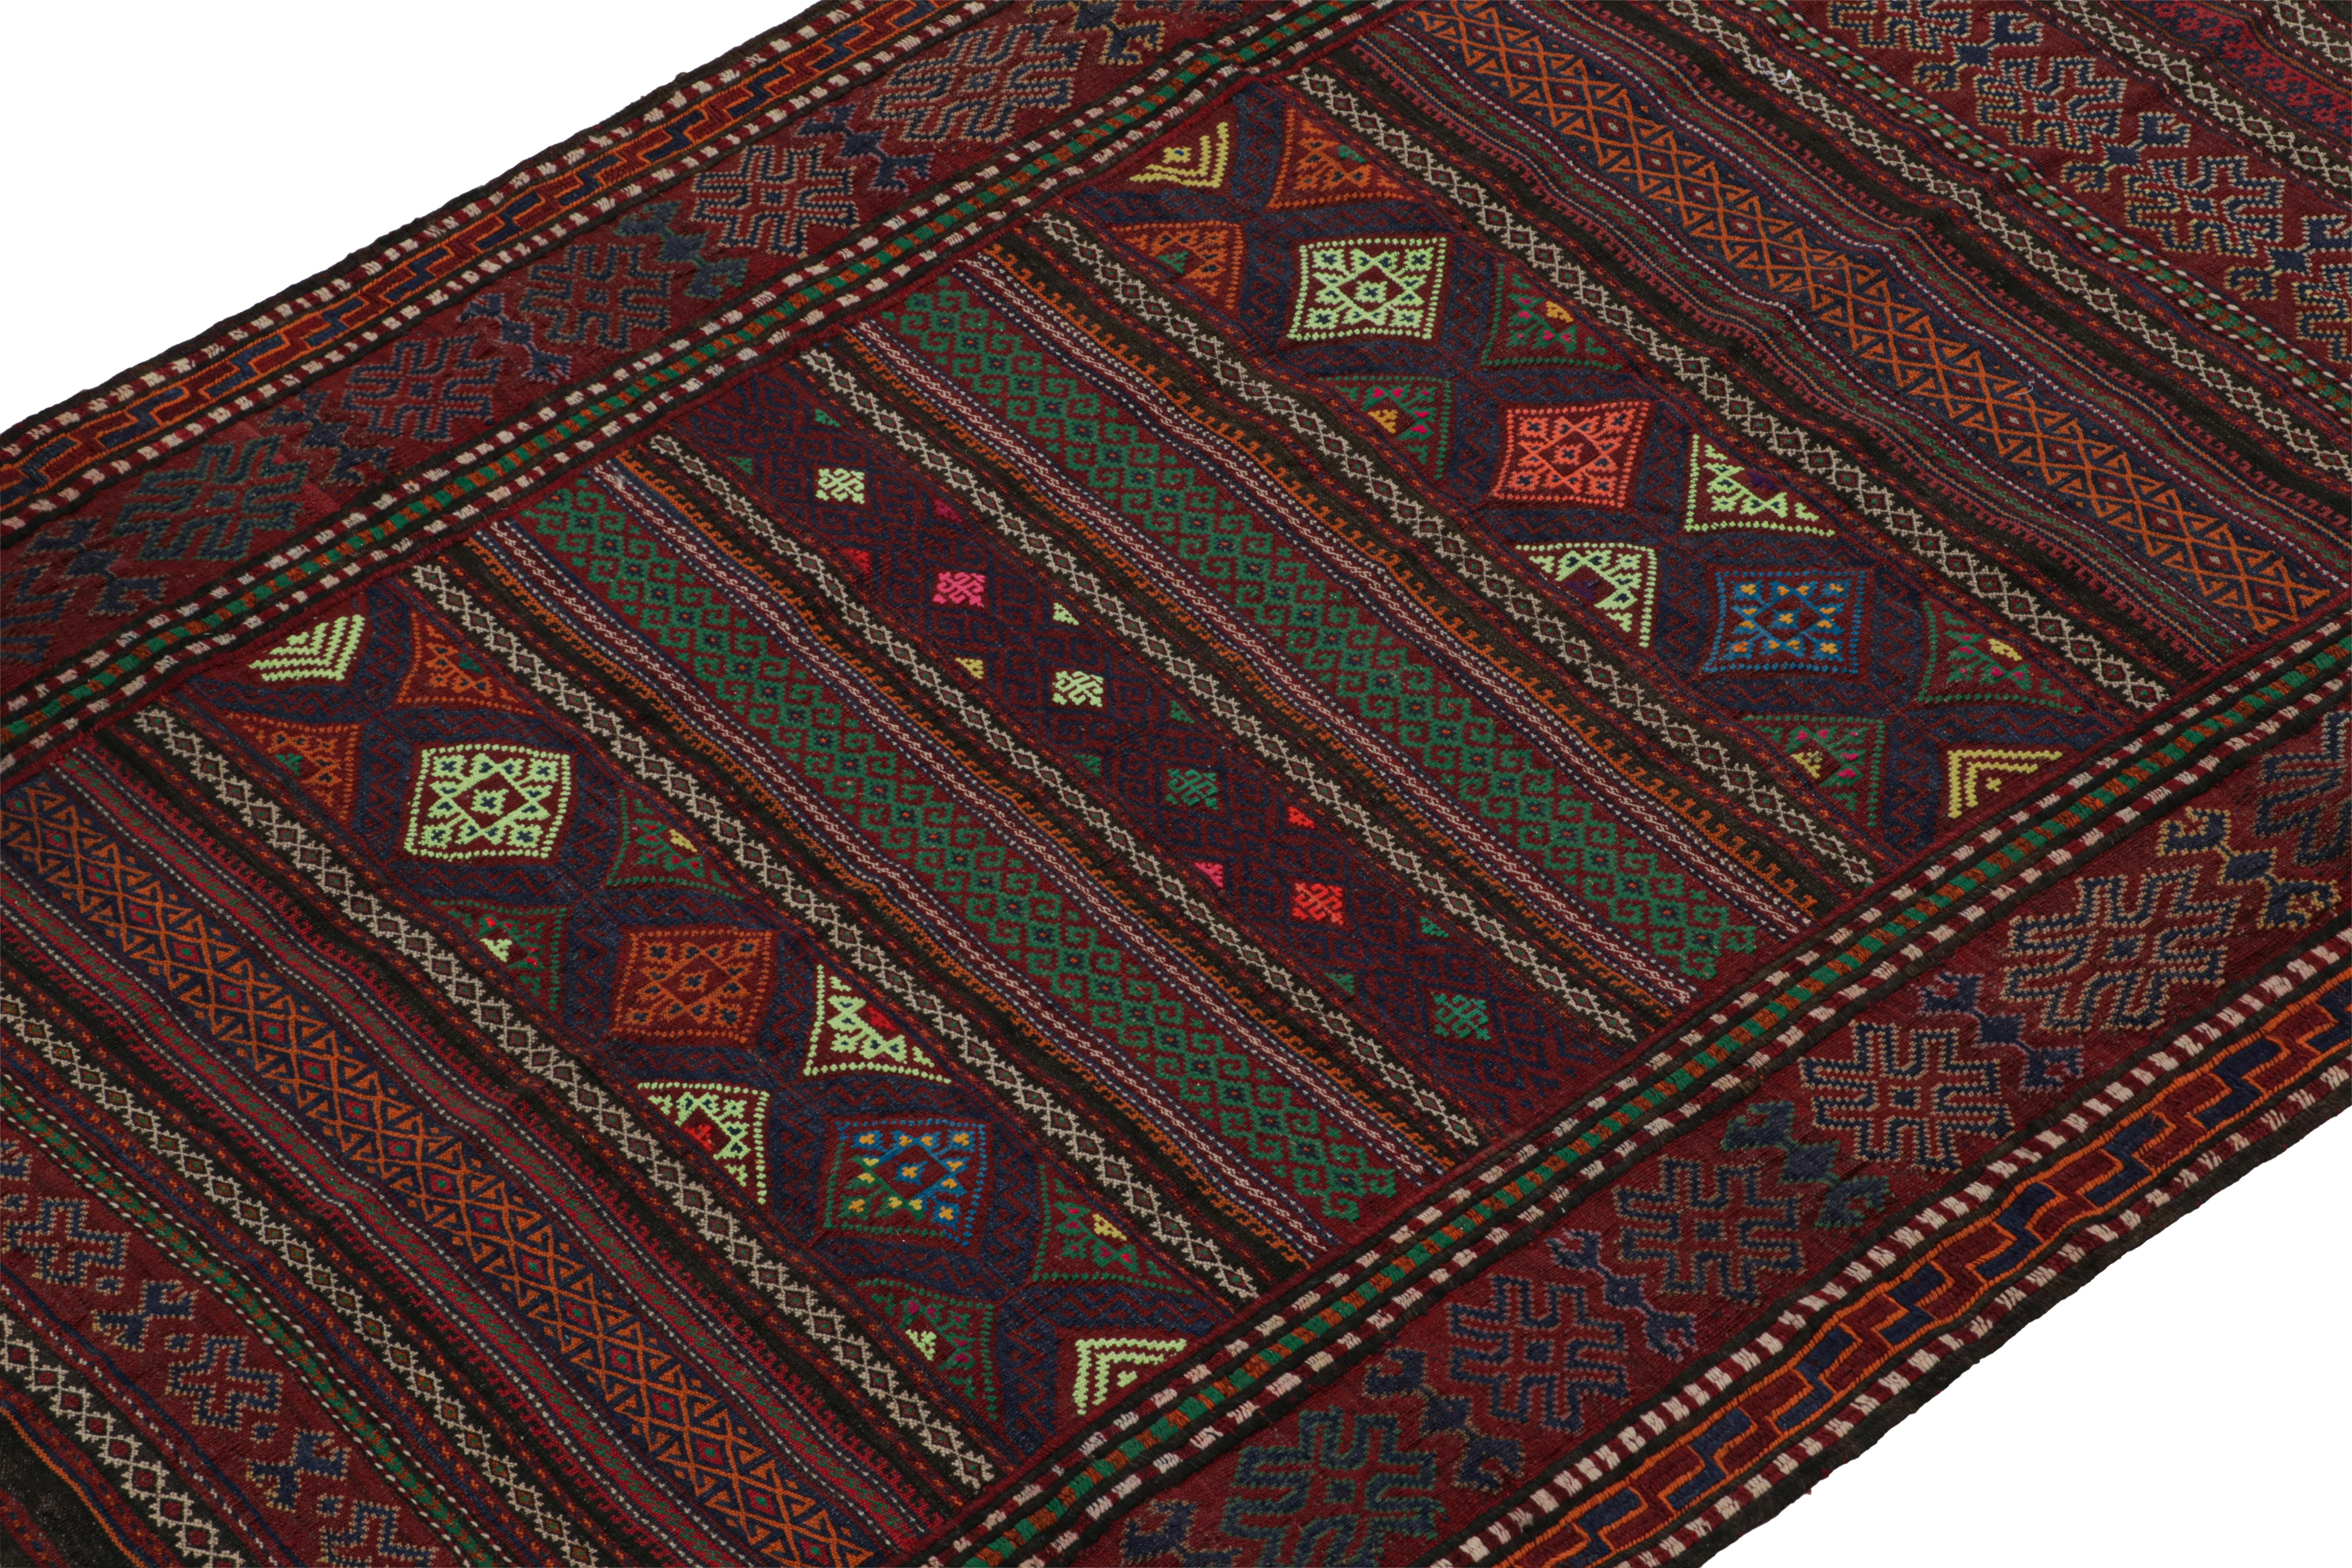 Hand-Woven Vintage Baluch Tribal Kilim in Red with Geometric Patterns, from Rug & Kilim For Sale